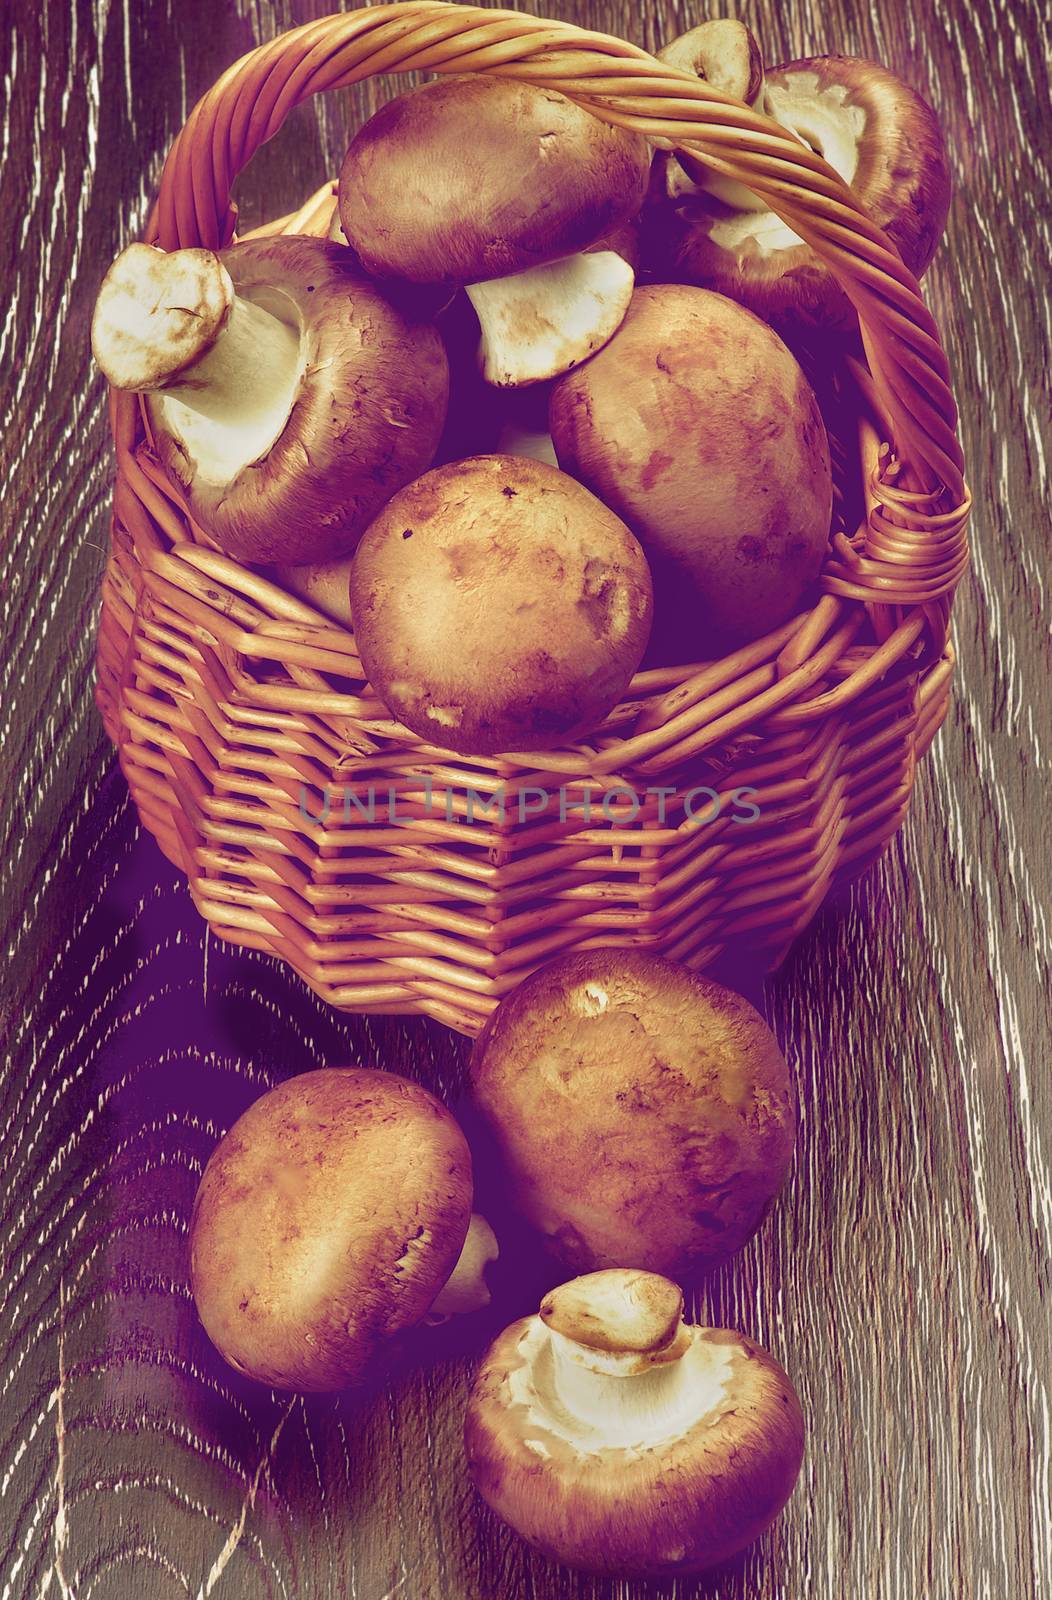 Perfect Raw Portabello Mushrooms in Wicker Basket closeup on Wooden background. Retro Styled